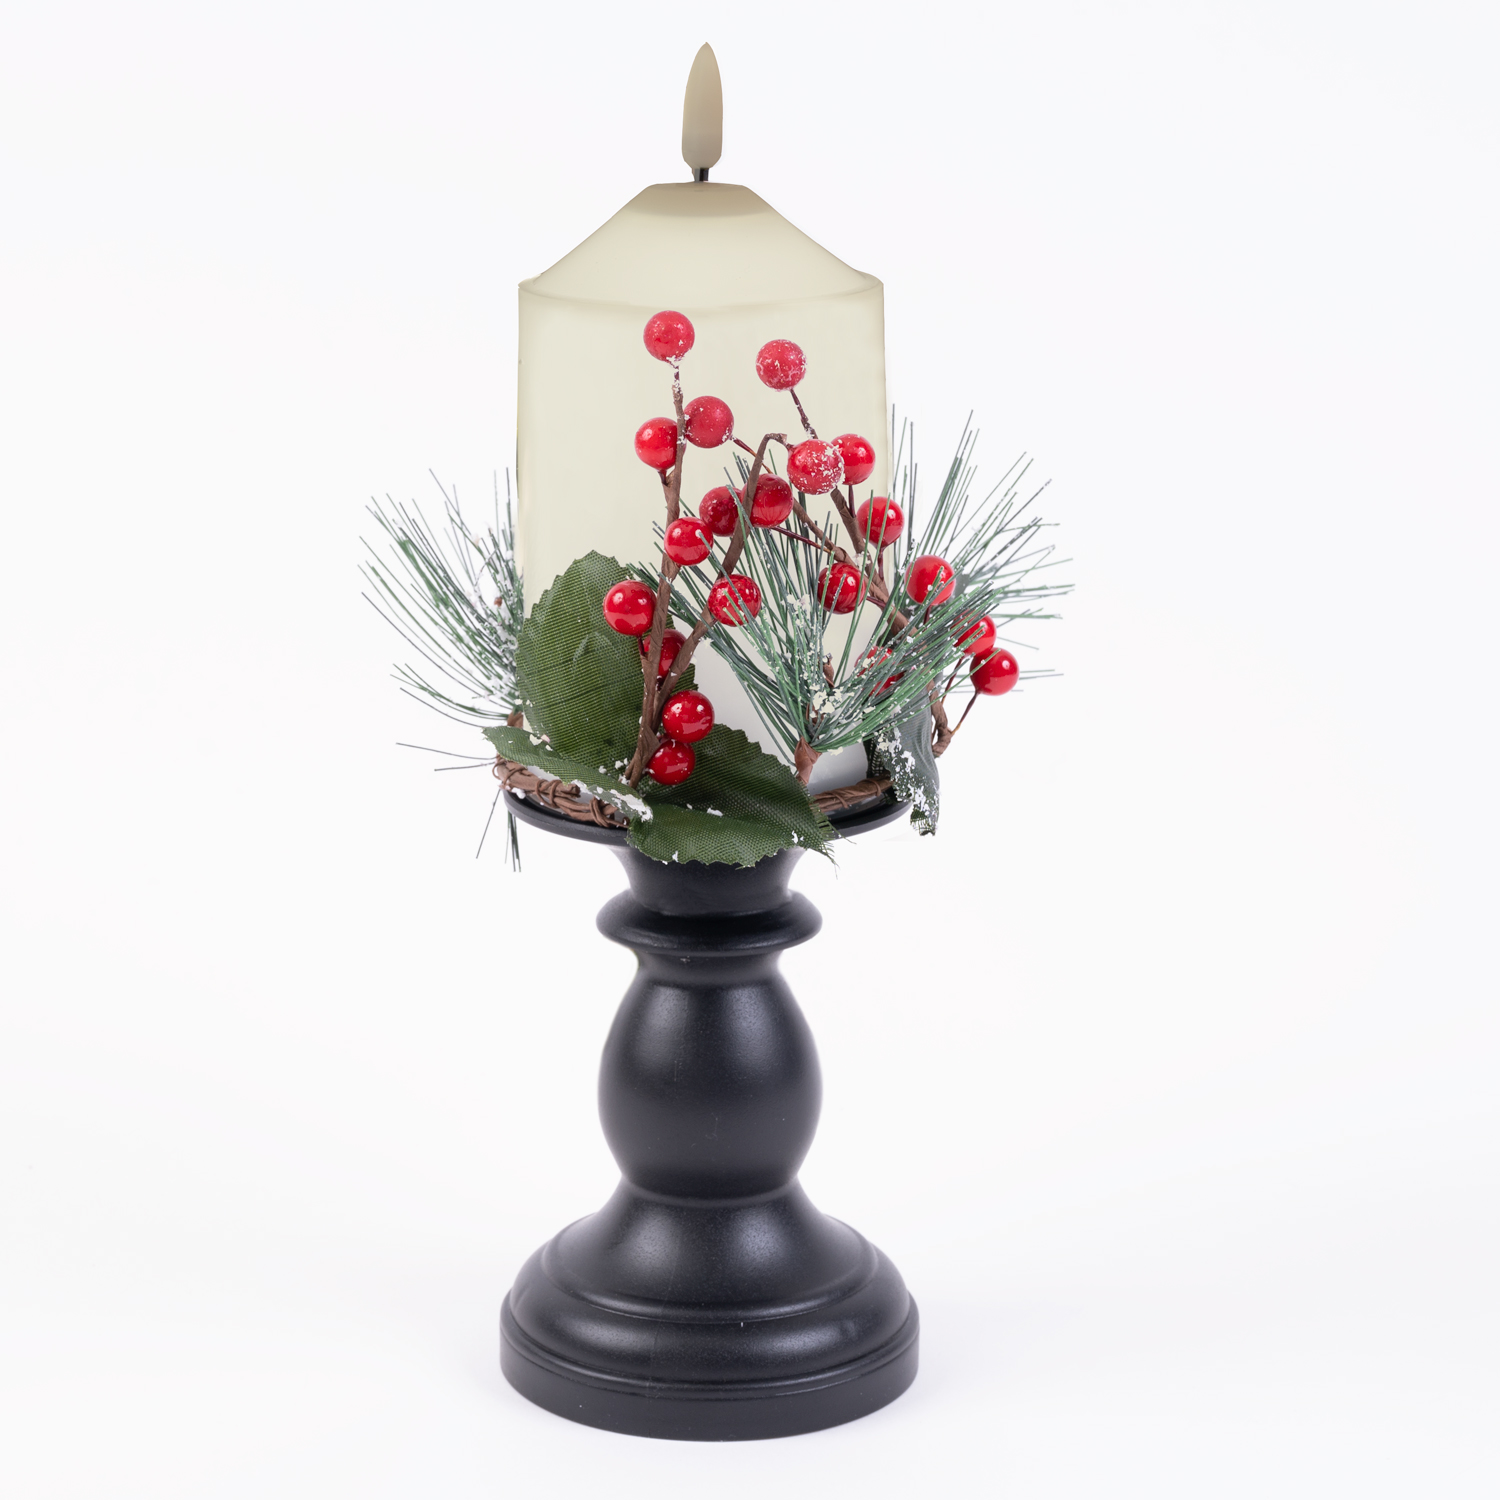 Decorative LED candle on pedestal with Christmas berries